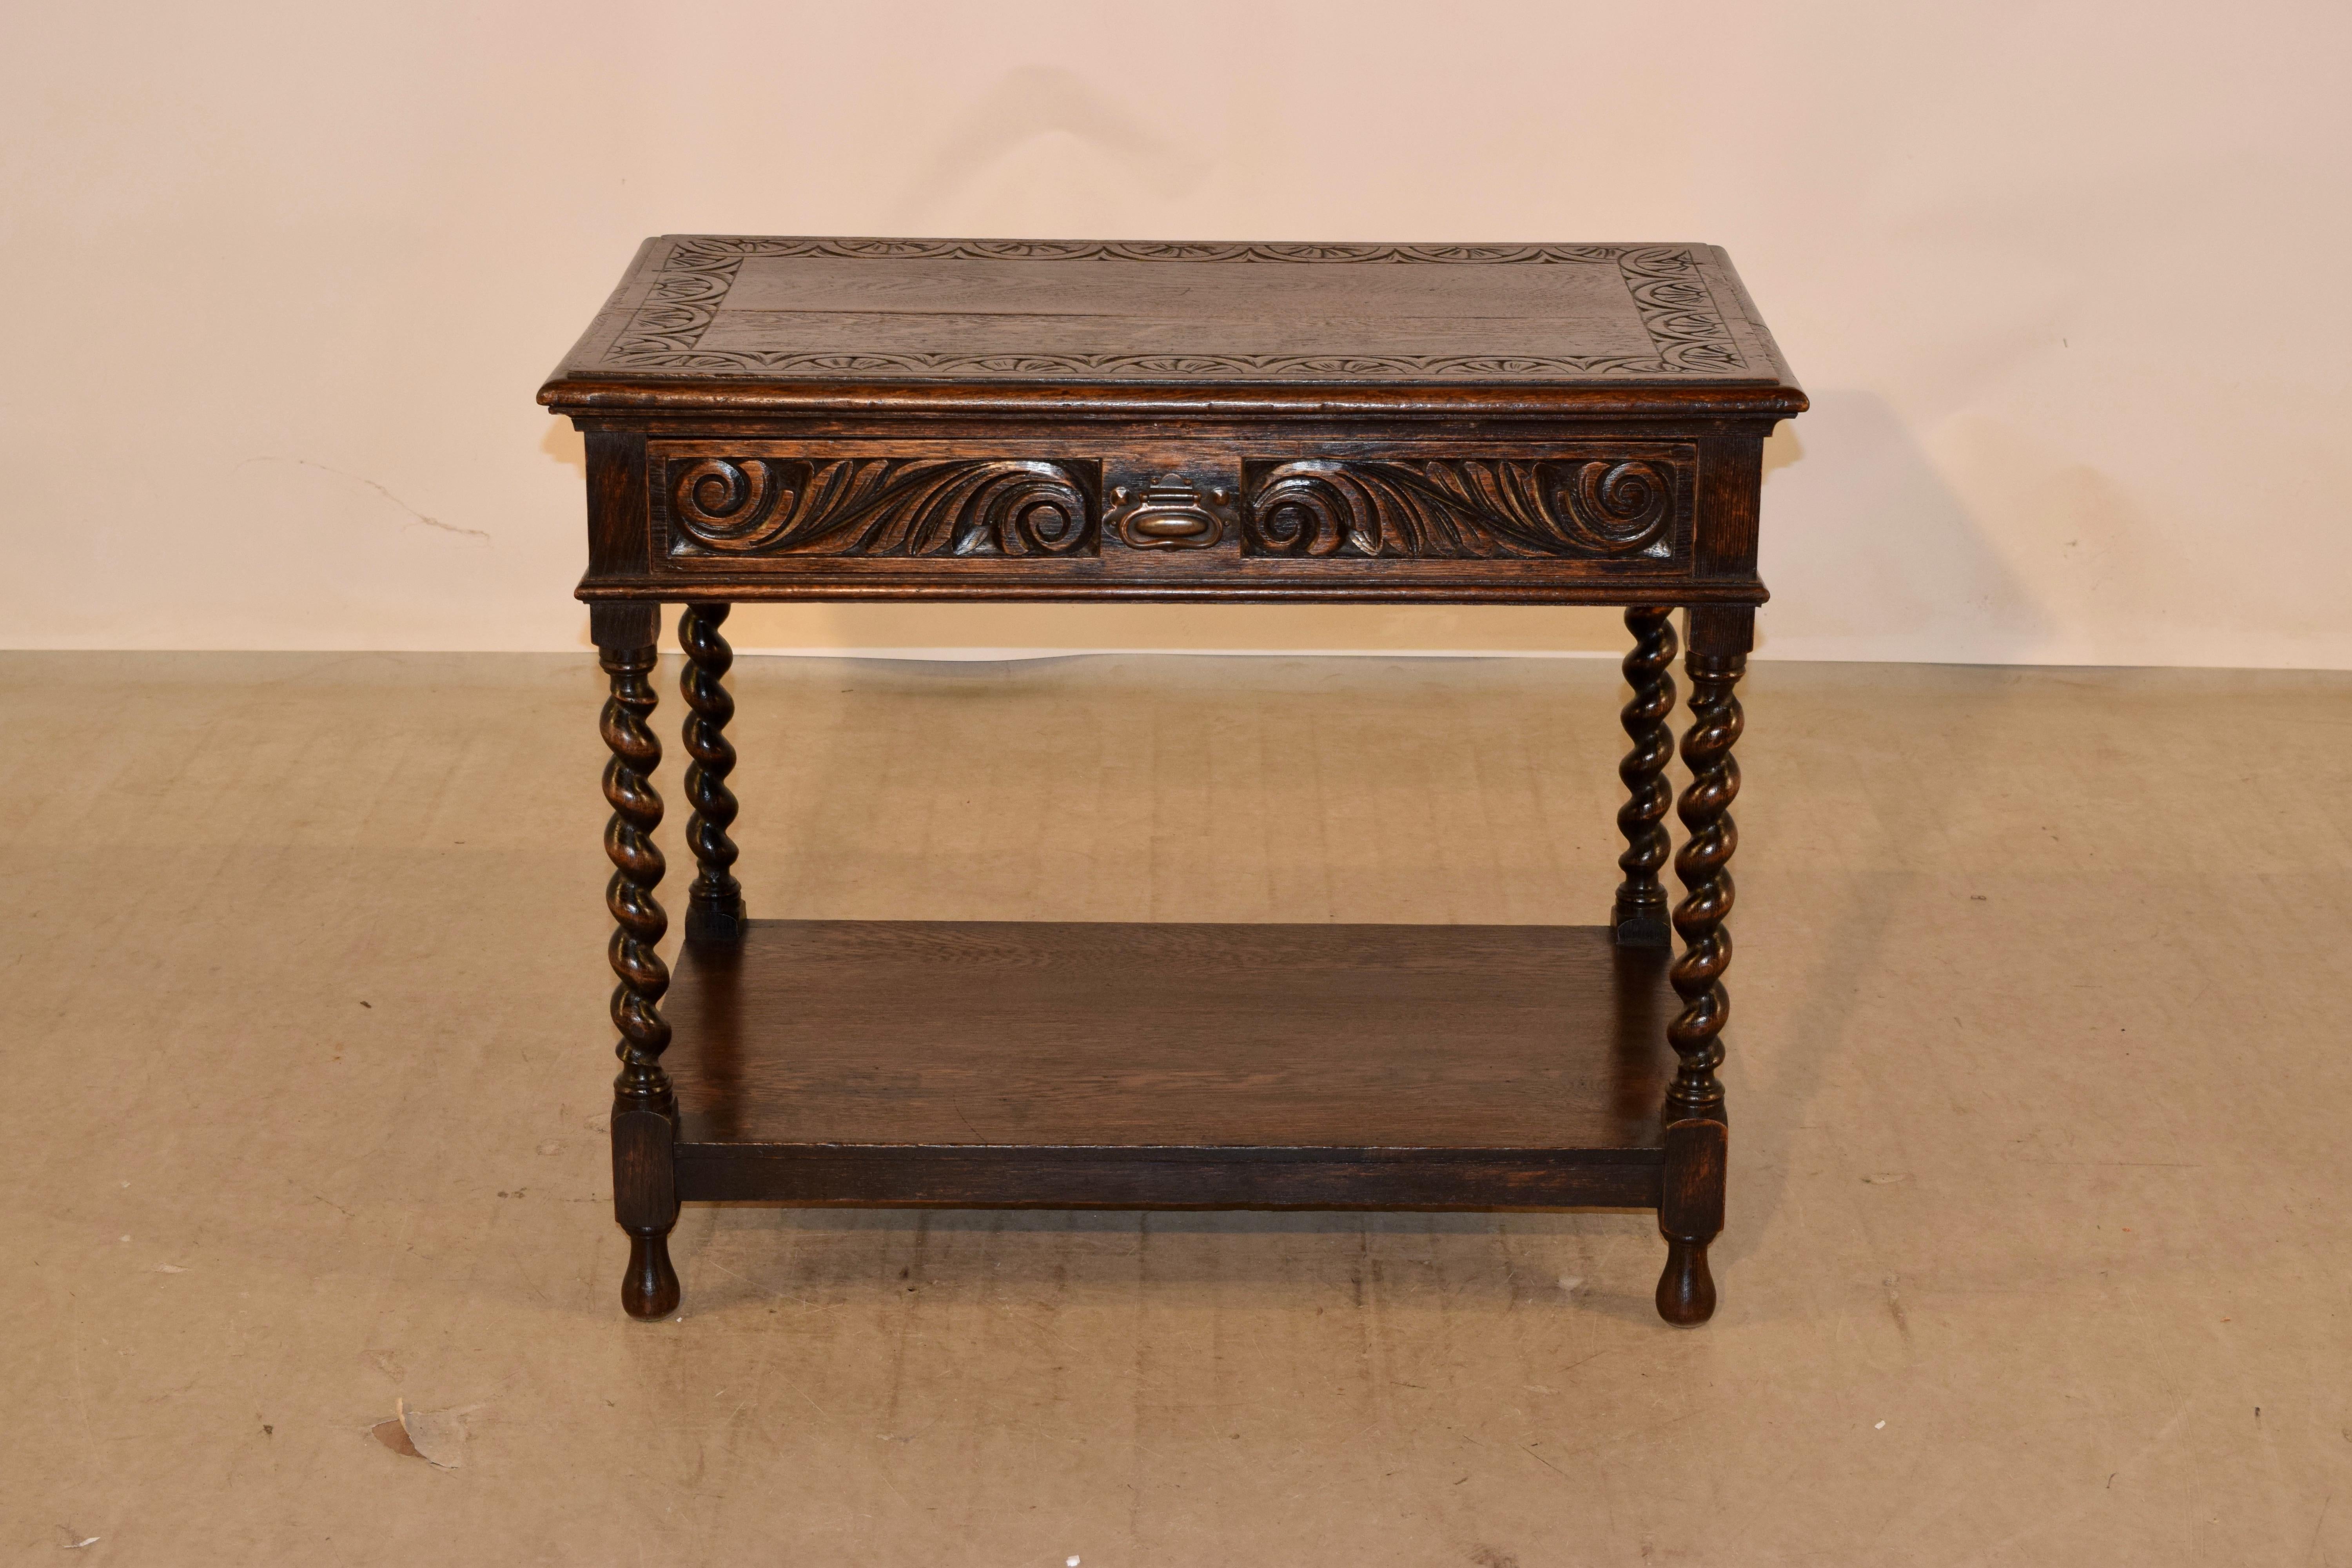 19th century oak side table from England with a carved and banded top, which is finished with a beveled edge. This follows down to a hand carved decorated apron on all four sides, for easy placement in any room, and containing a single drawer in the